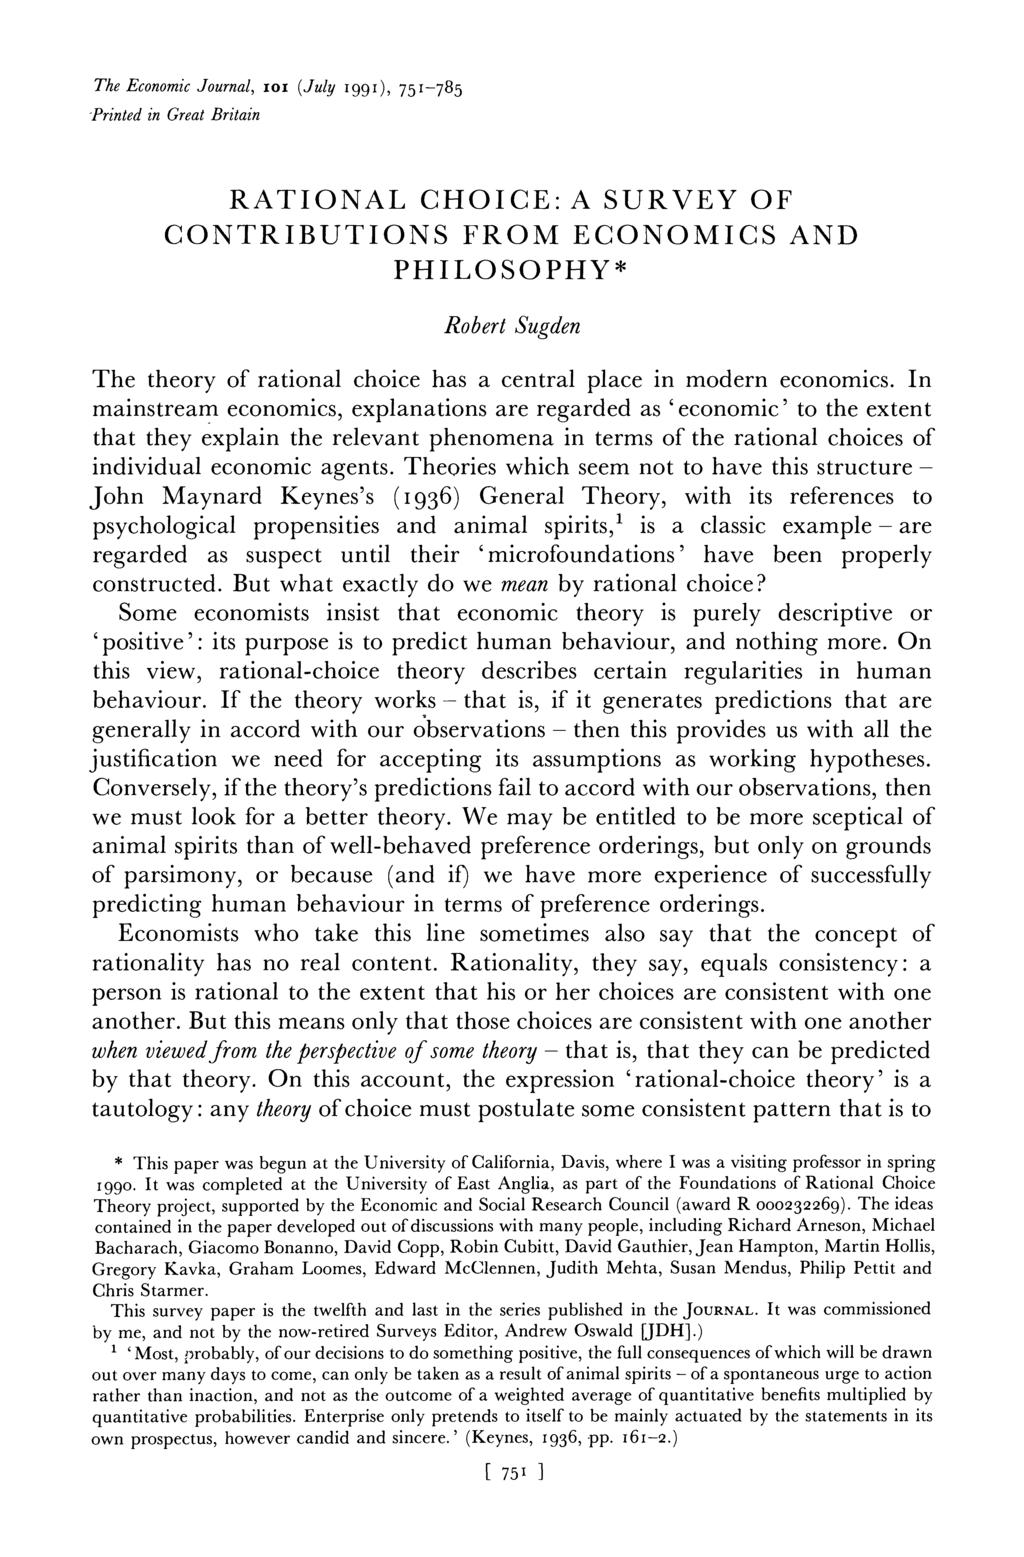 The Economic Journal, IoI (July I991), 751-785 Printed in Great Britain RATIONAL CHOICE: A SURVEY OF CONTRIBUTIONS FROM ECONOMICS AND PHILOSOPHY* Robert Sugden The theory of rational choice has a